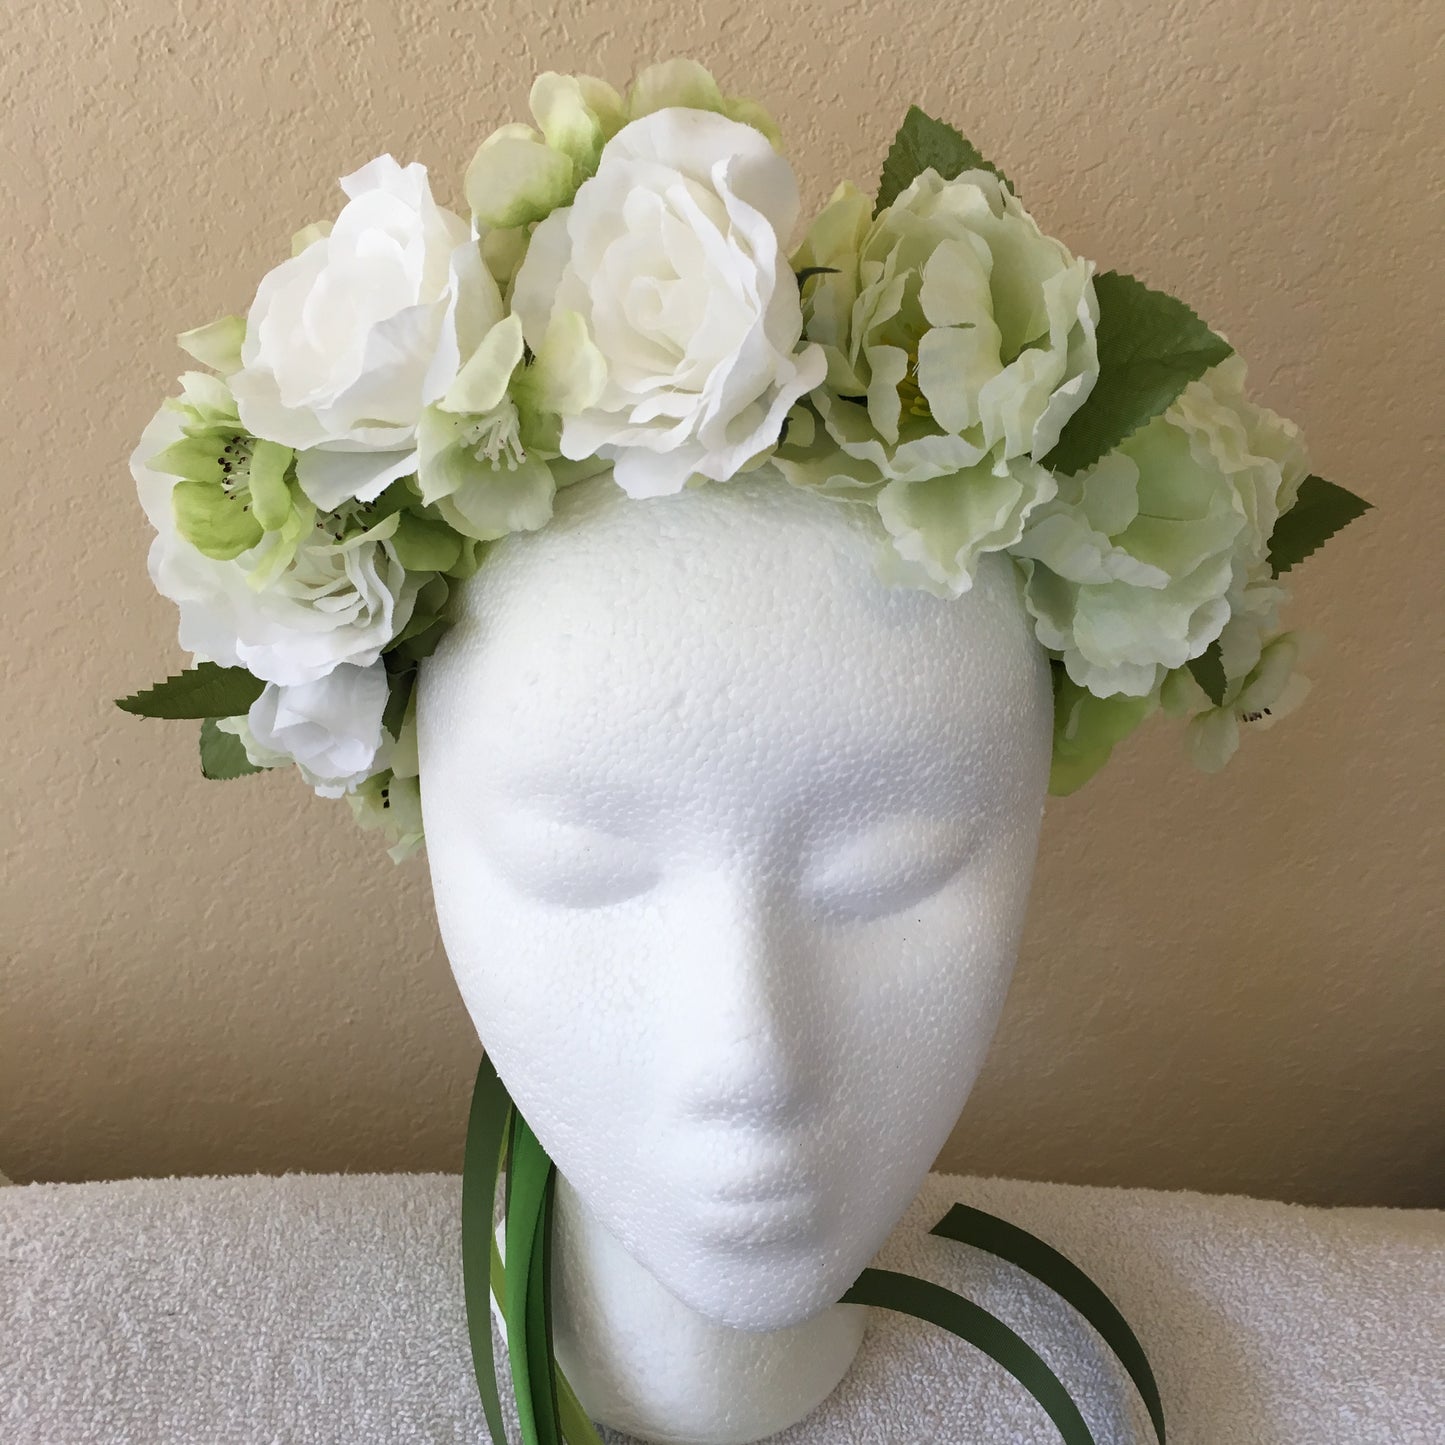 Large Wreath - All shades of green w/ white roses